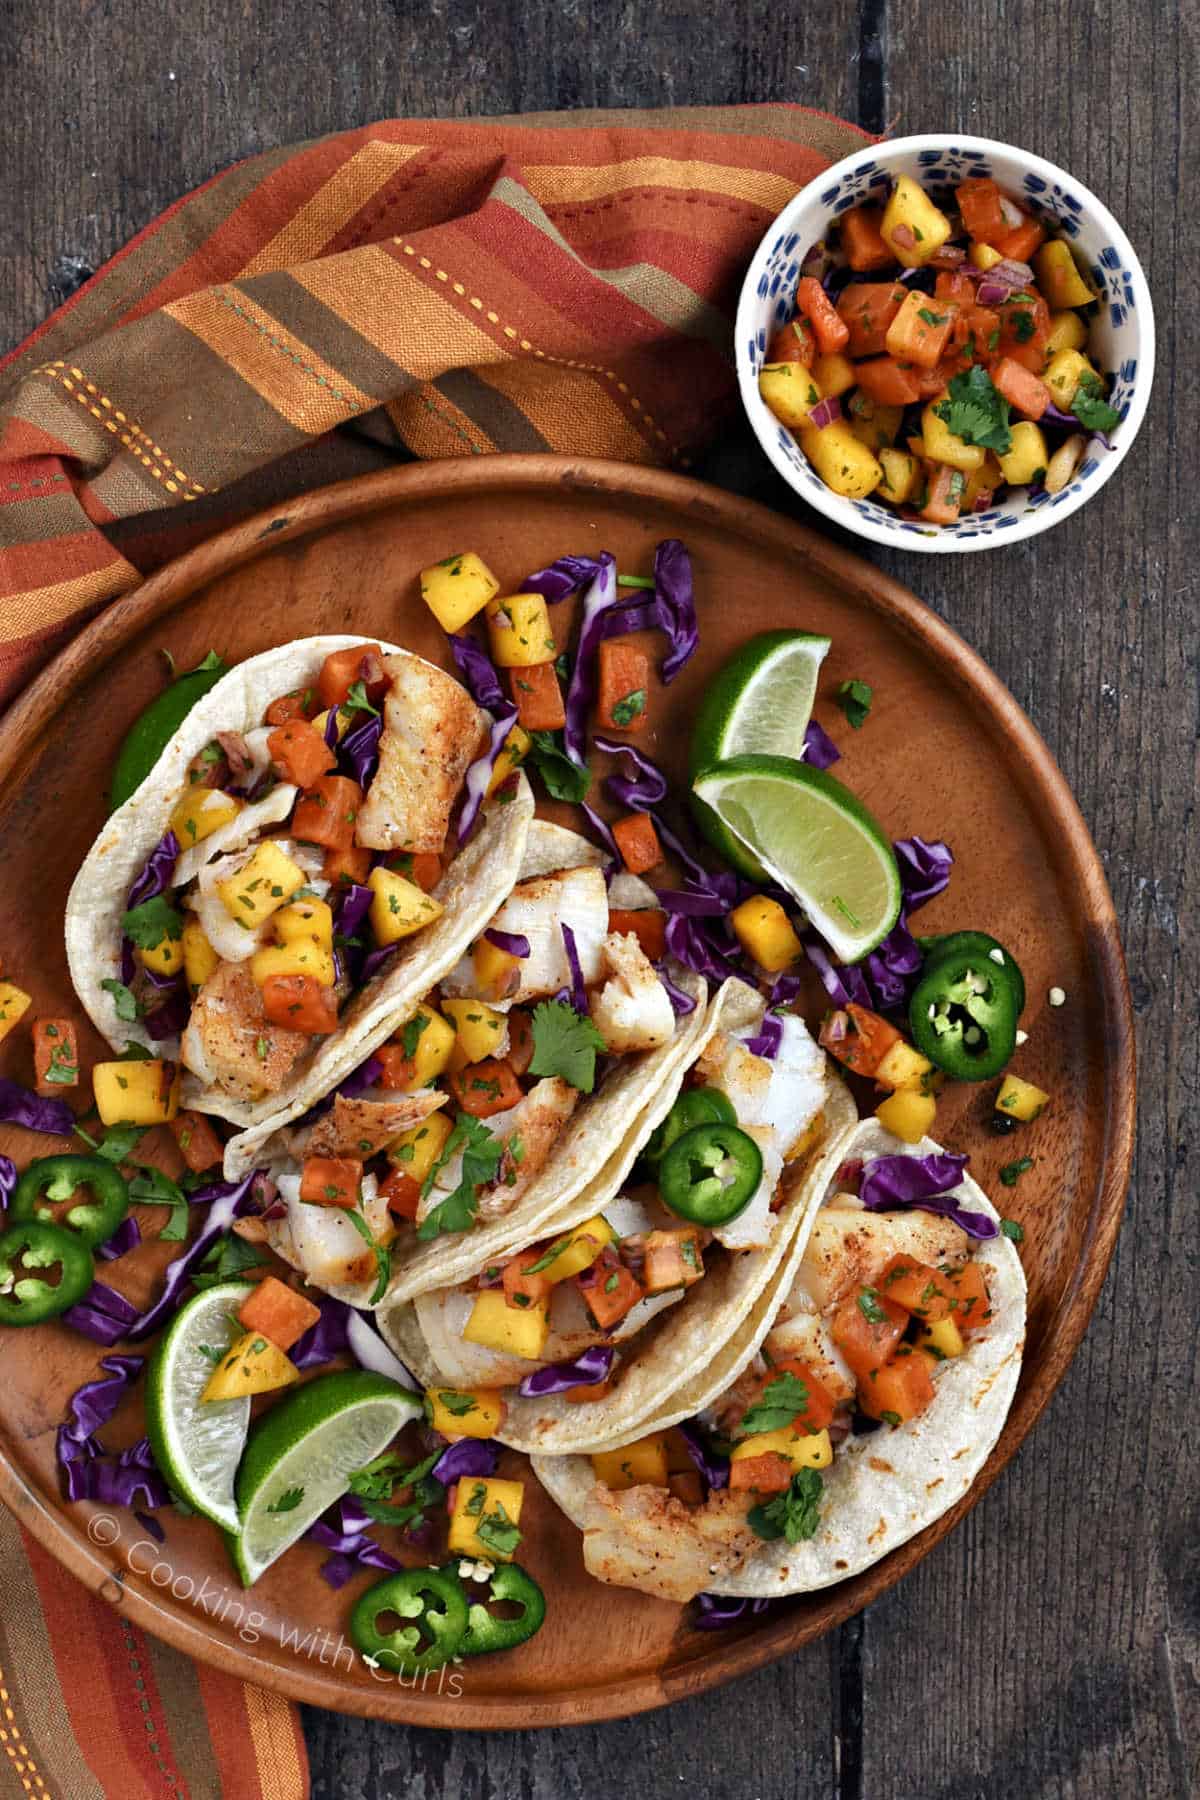 Looking down on four fish tacos with mango salsa and shredded red cabbage on a wood platter.